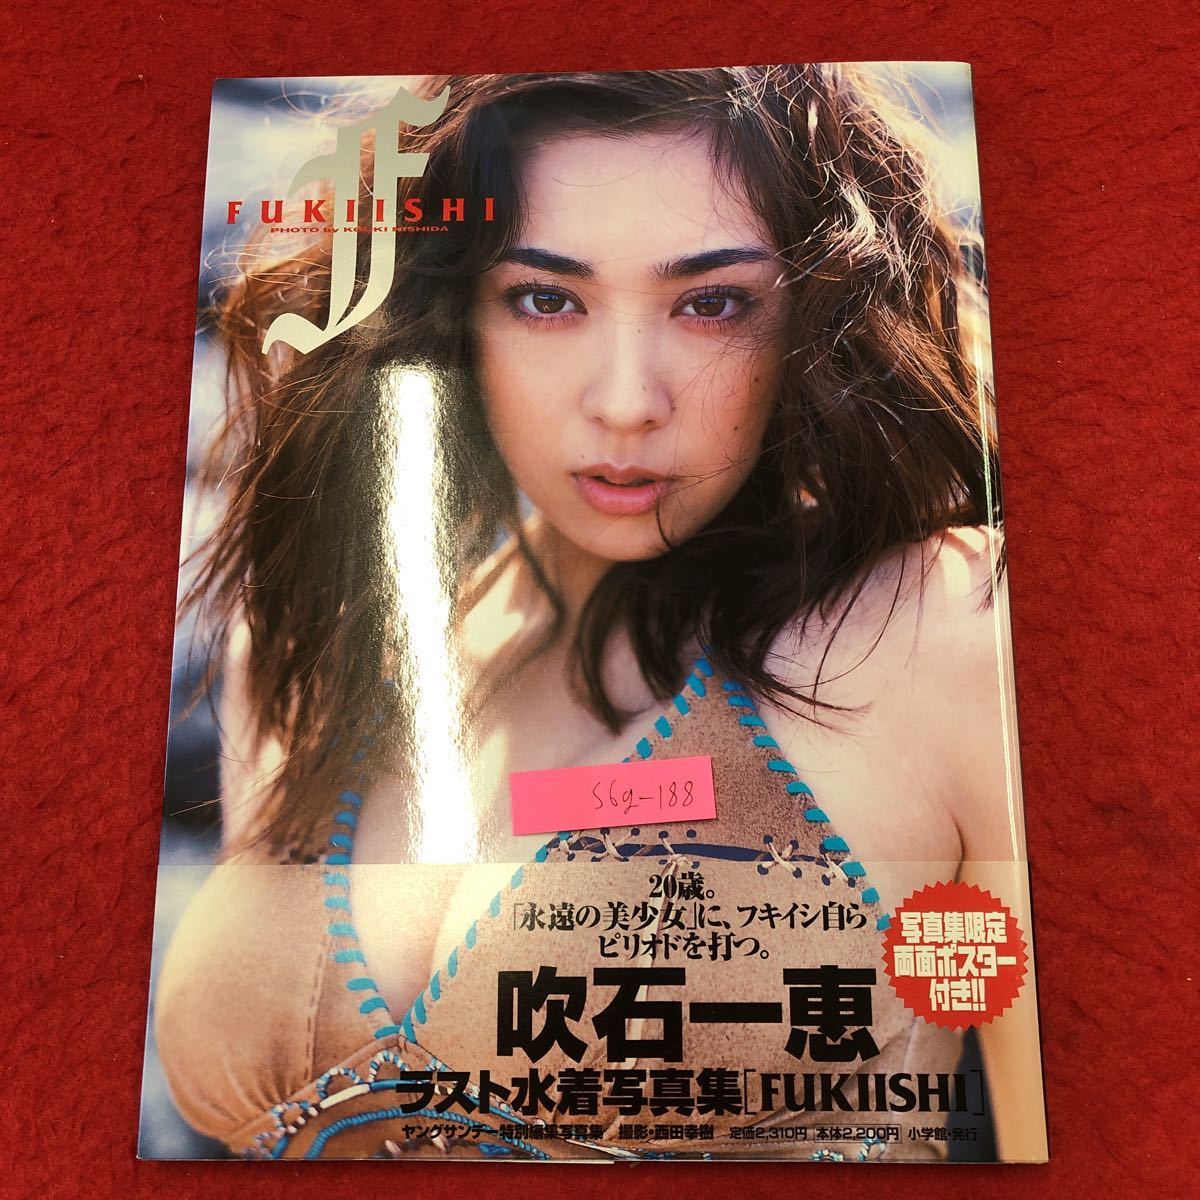 S6g-188 Fukiishi Kazue photoalbum FUKIISHI appendix attaching photographing west rice field ..2002 year 12 month 1 day the first version no. 1. issue Shogakukan Inc. photoalbum model star Fukiishi Kazue swimsuit sea 